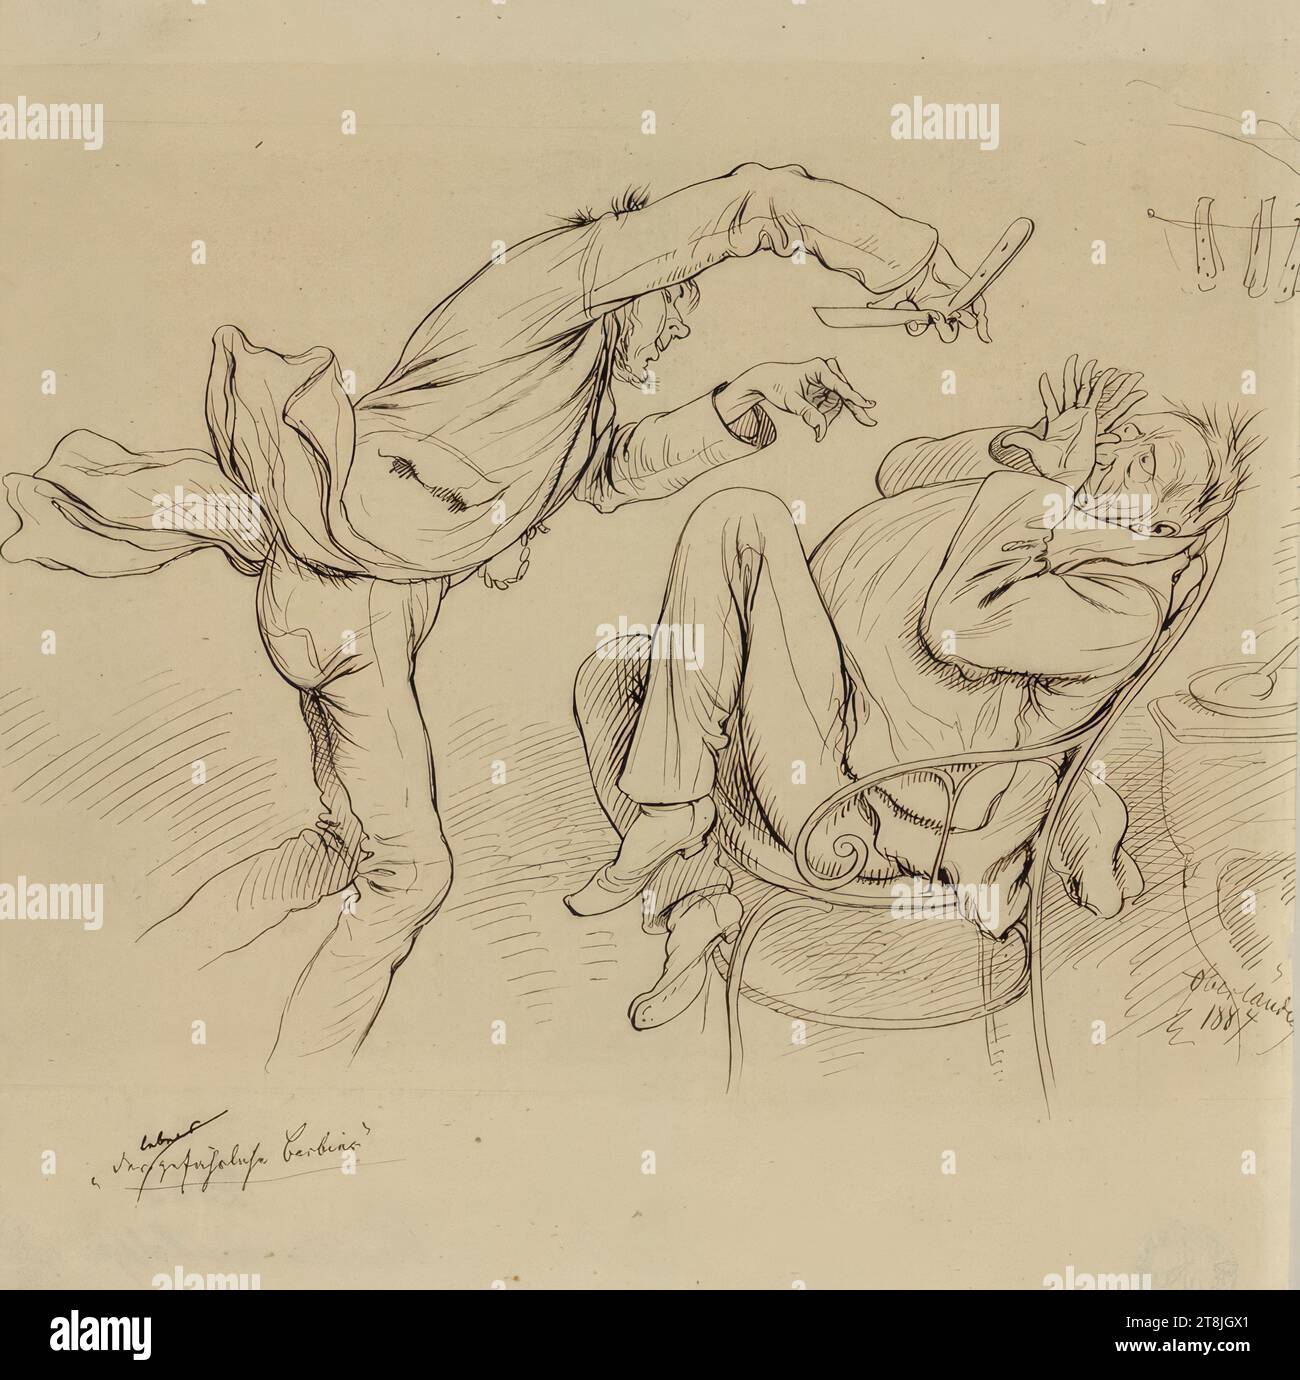 The life-threatening barber', Adolf Oberländer, Regensburg 1845 - 1923 Munich, 1884, drawing, pen in brown; Trace of a pencil border line around the image, 208 x 197 mm, recto: r. and in the illustration: 'Oberländer 1884', pen in brown; r. slightly cropped, left, under the illustration: 'The life-threatening barber' ', pen in brown, l.u. '60', lead, erased, '789', lead, erased, - verso: r.r. '2033 The nose as a halter', Bleist Stock Photo